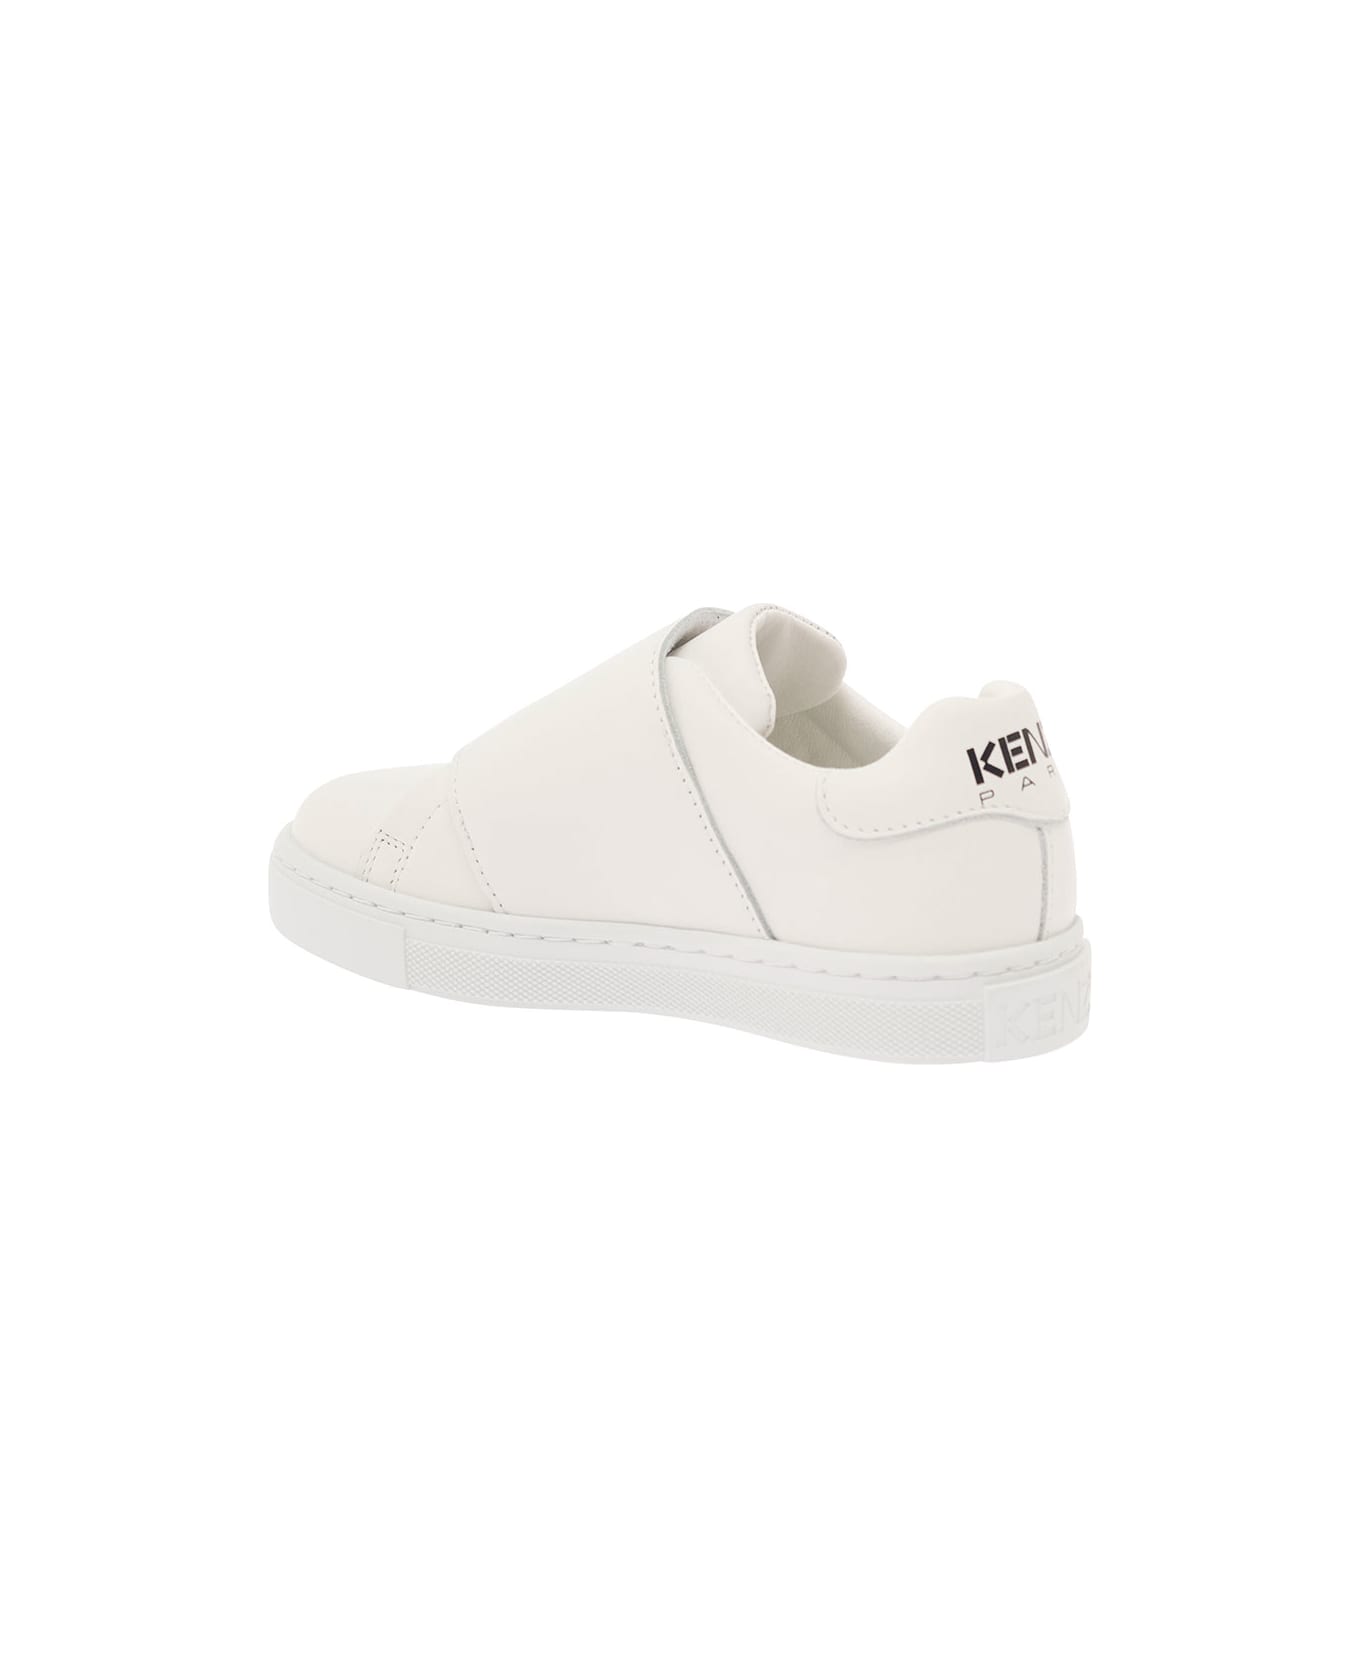 Kenzo Kids White Sneakers With Embroidered Tiger In Calf Leather Boy - White シューズ